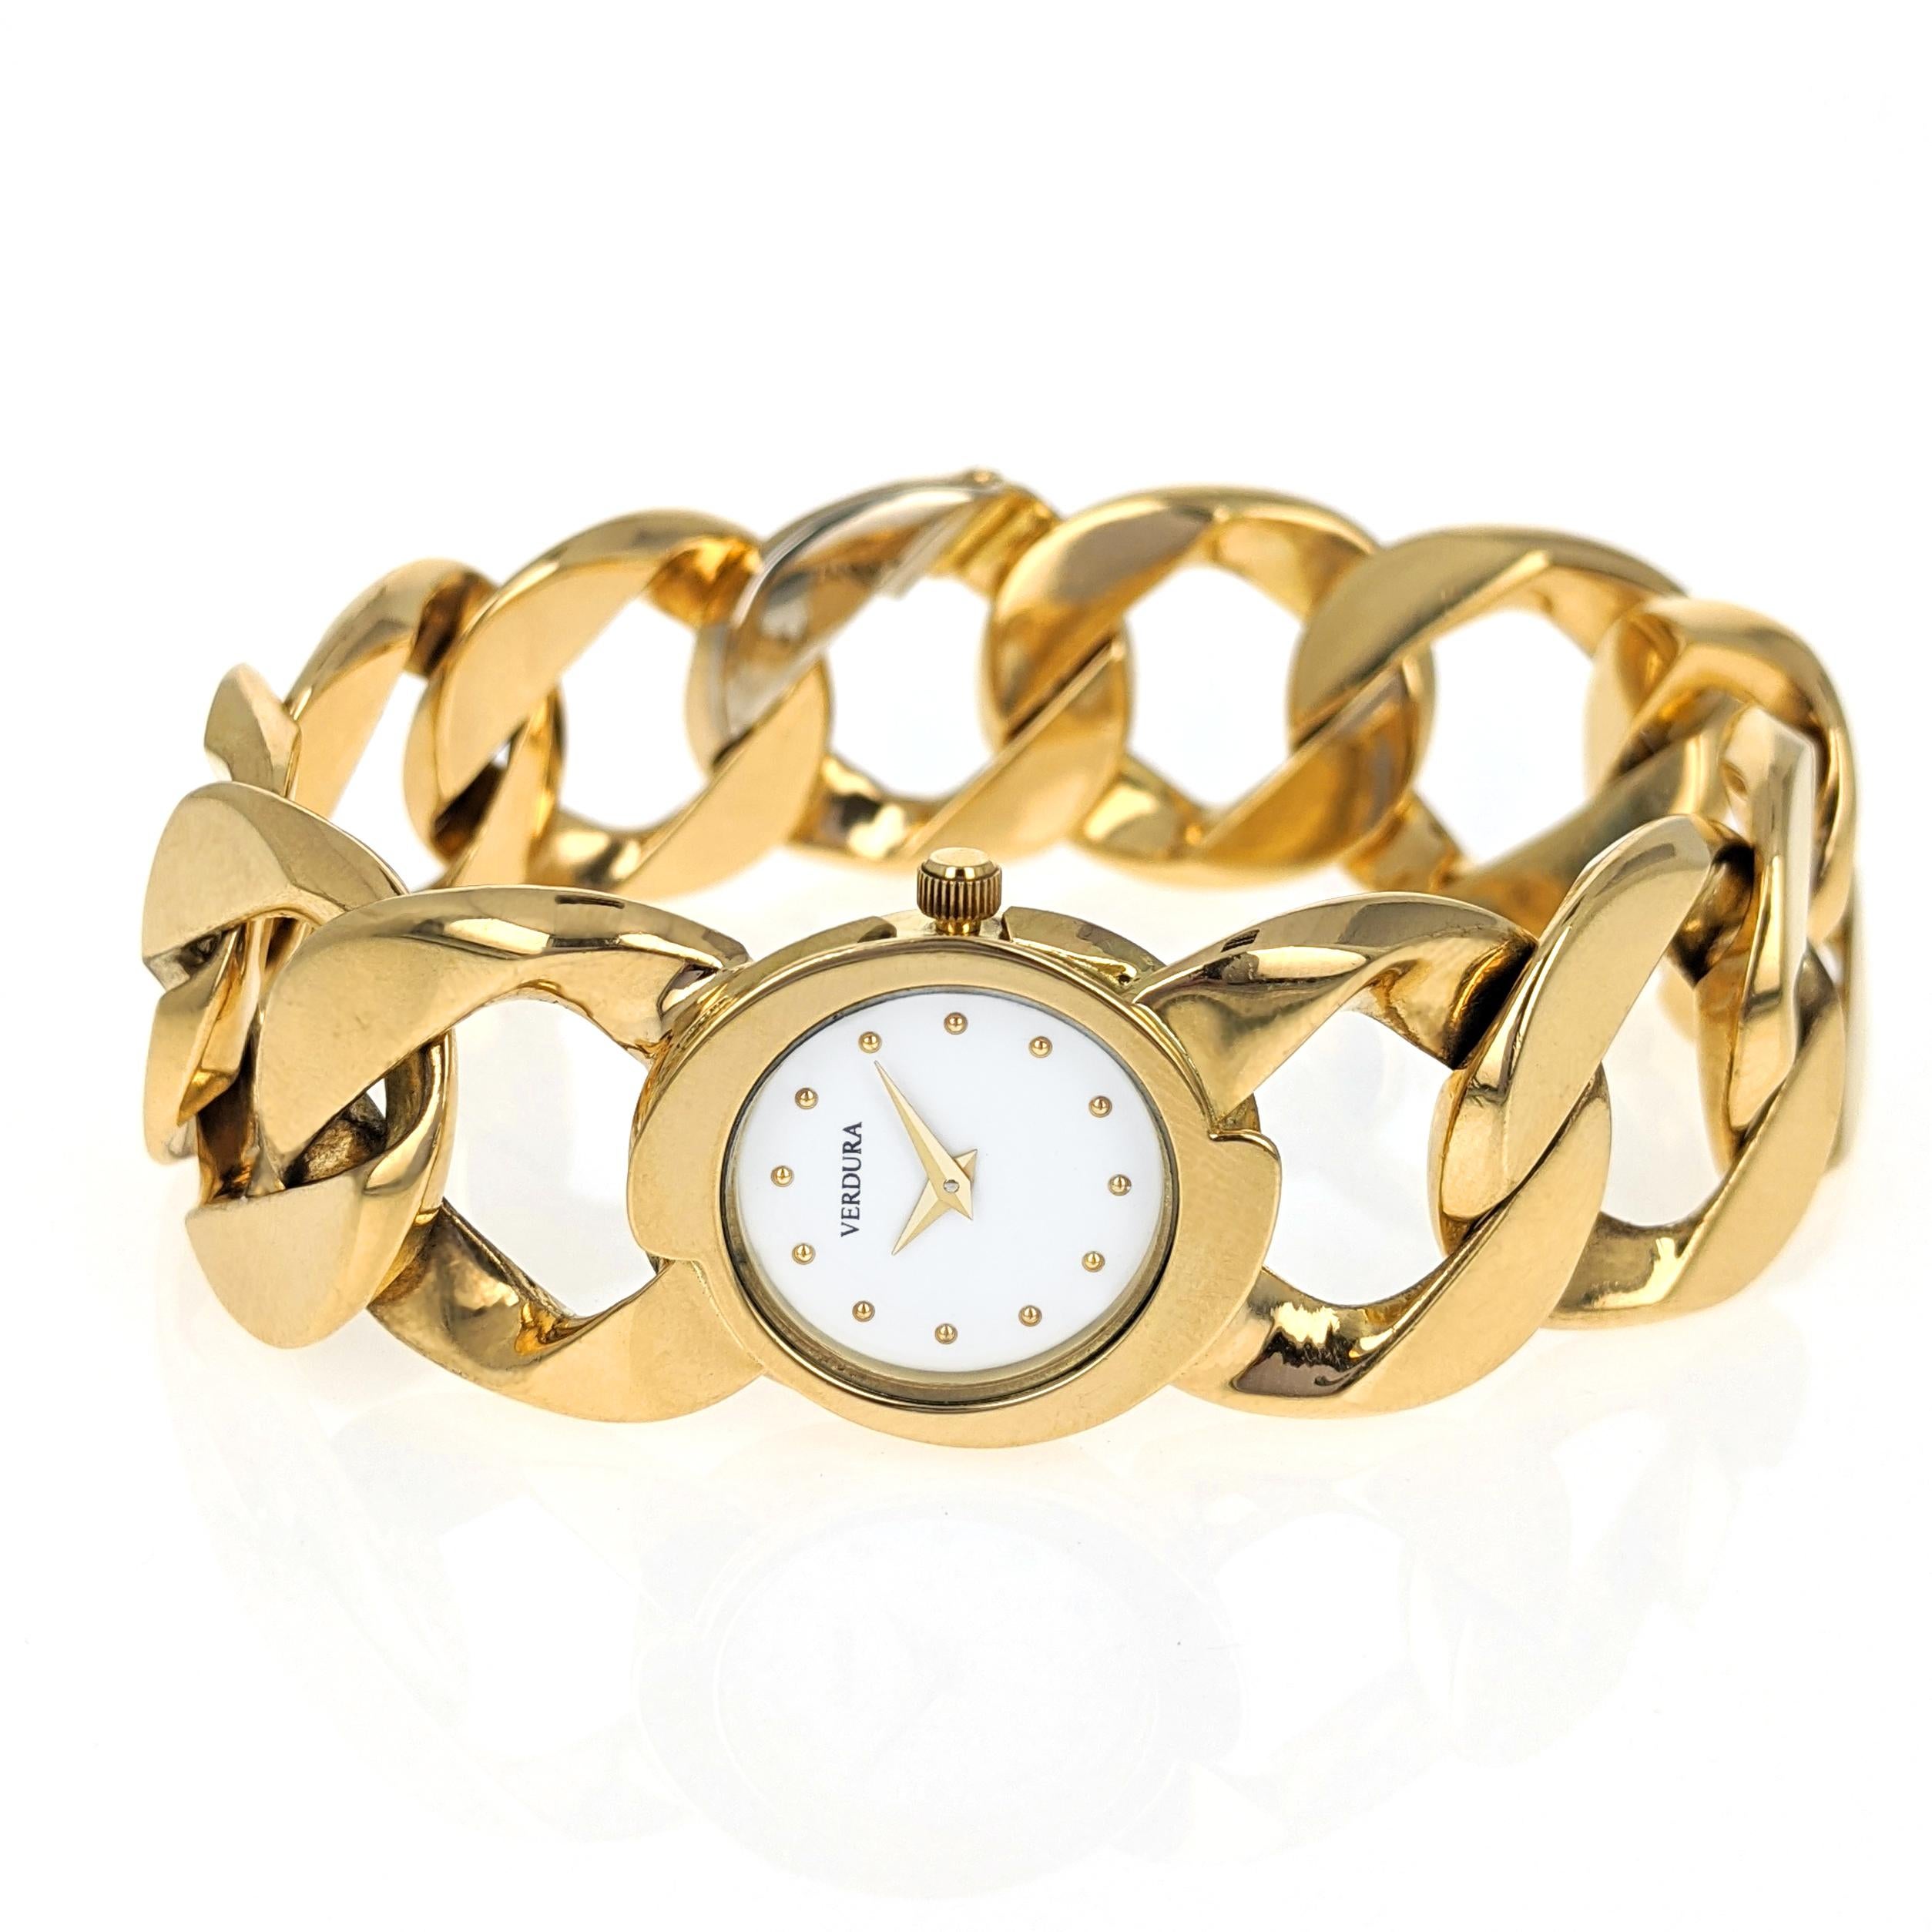 This 18 karat yellow gold watch features Verdura's classic curb link bracelet with a round white lacquer dial and gold dot hour markers. The back of the case is inscribed 